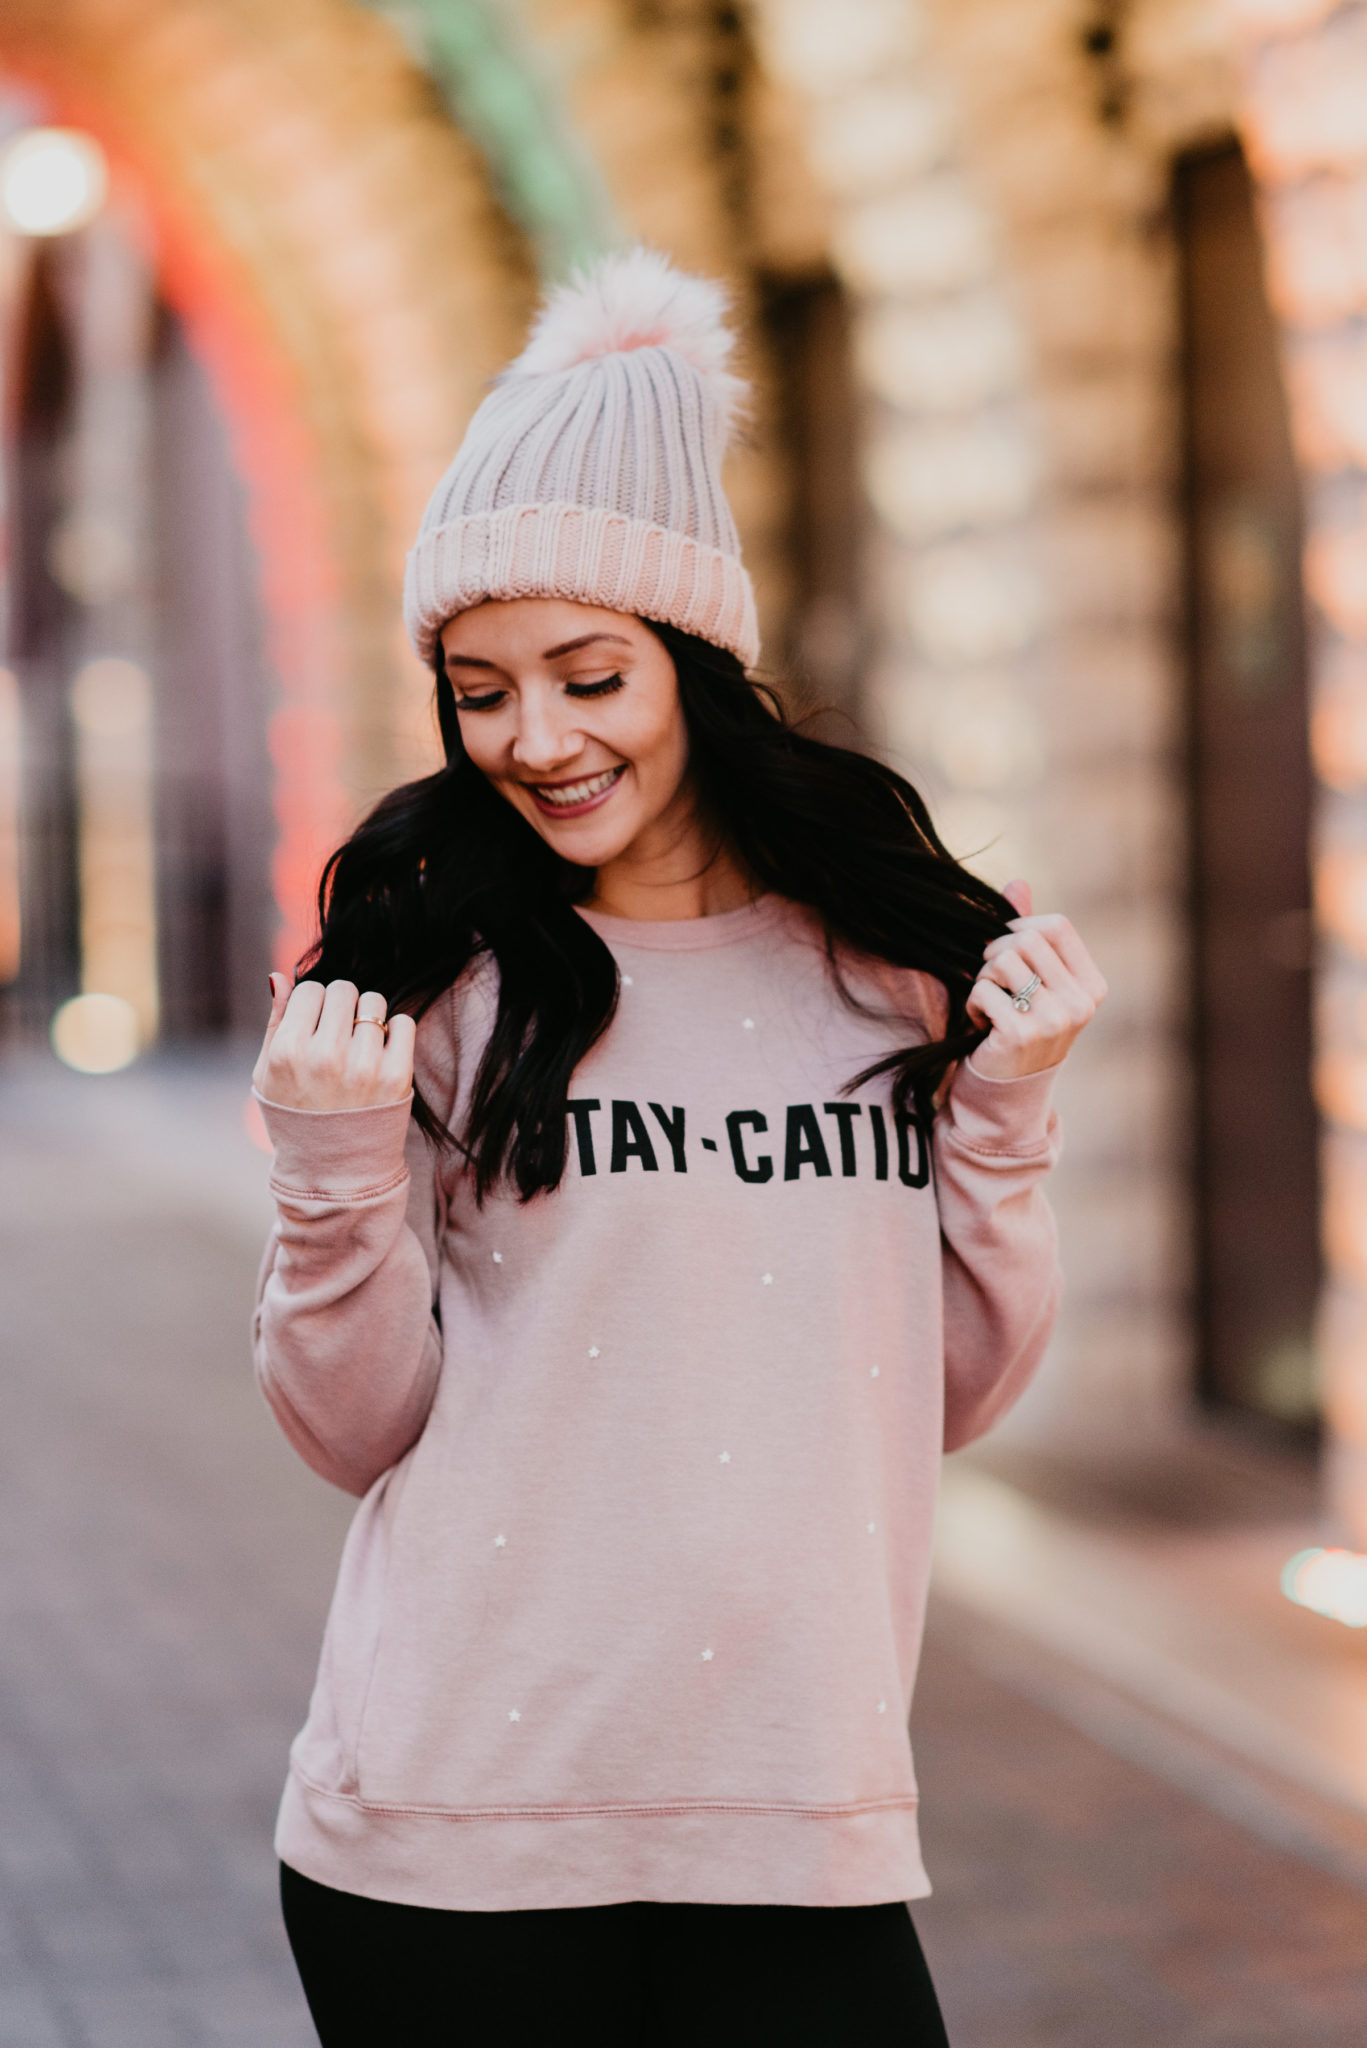 stay-cation sweater and pink beanie - 15 Ways to Treat Yourself by popular Las Vegas style blogger Outfits & Outings